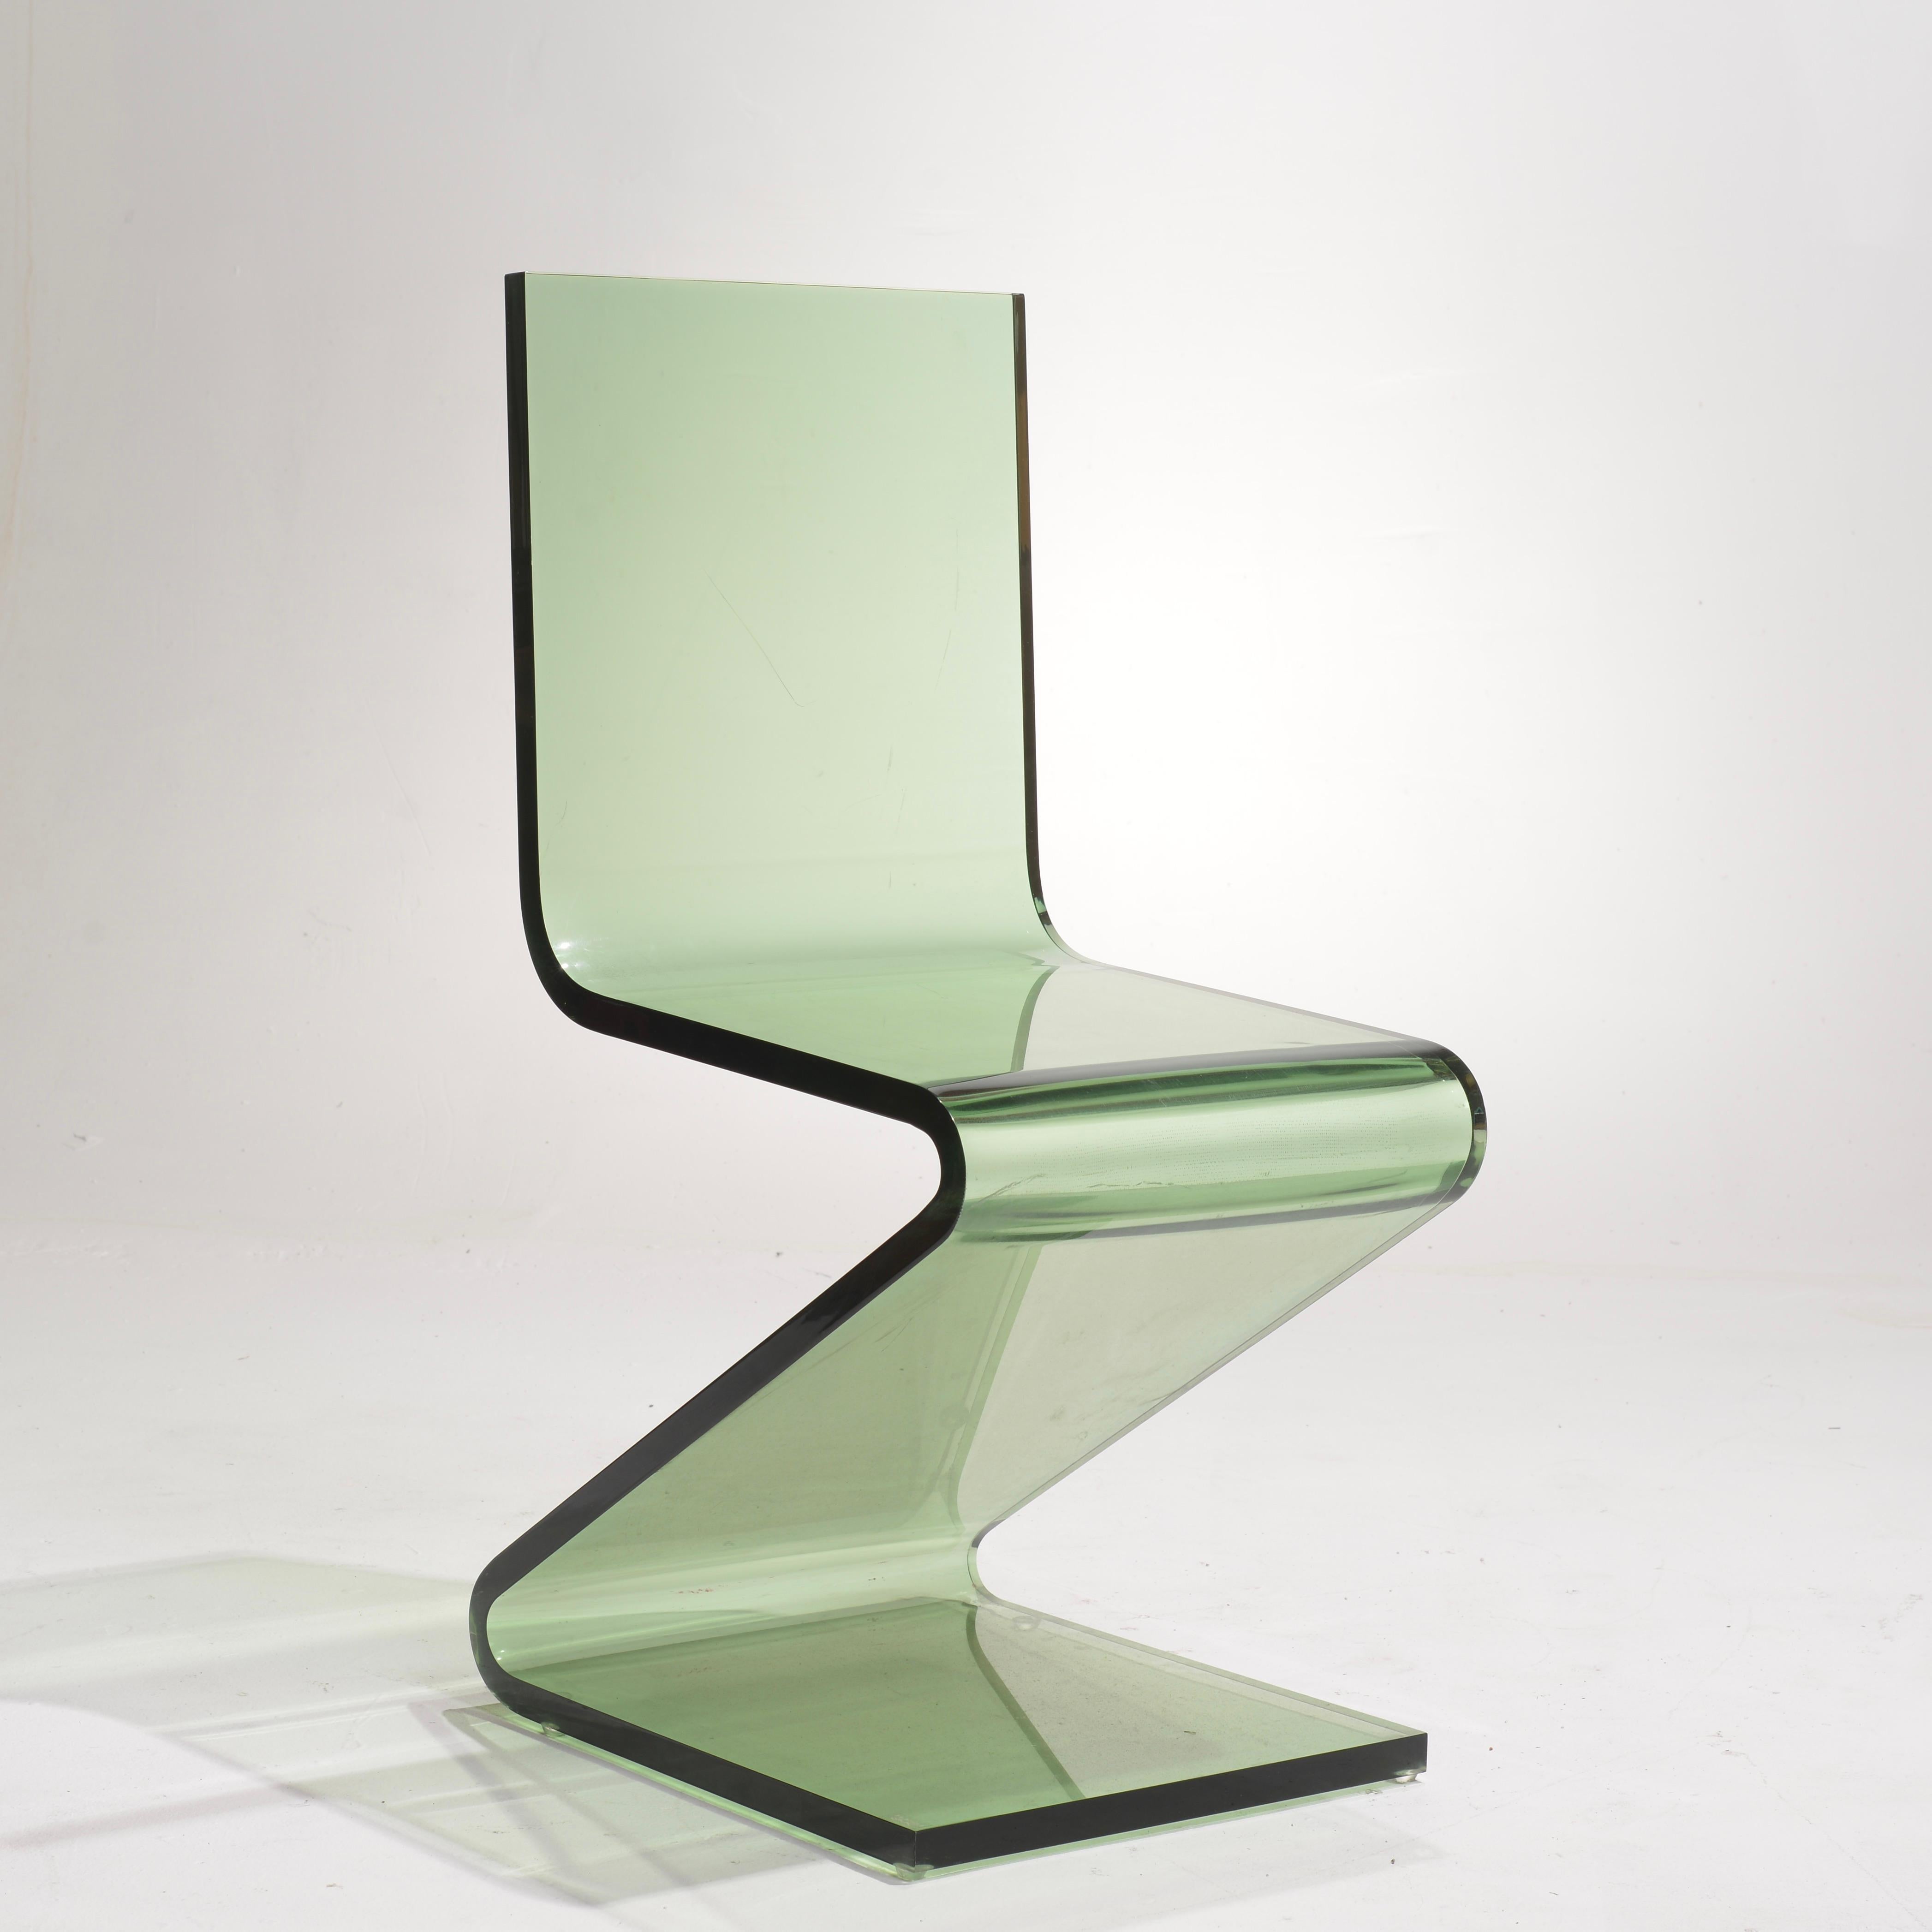 Vintage Lucite Z Table and Z Chairs by Shlomi Haziza for H Studio For Sale 10